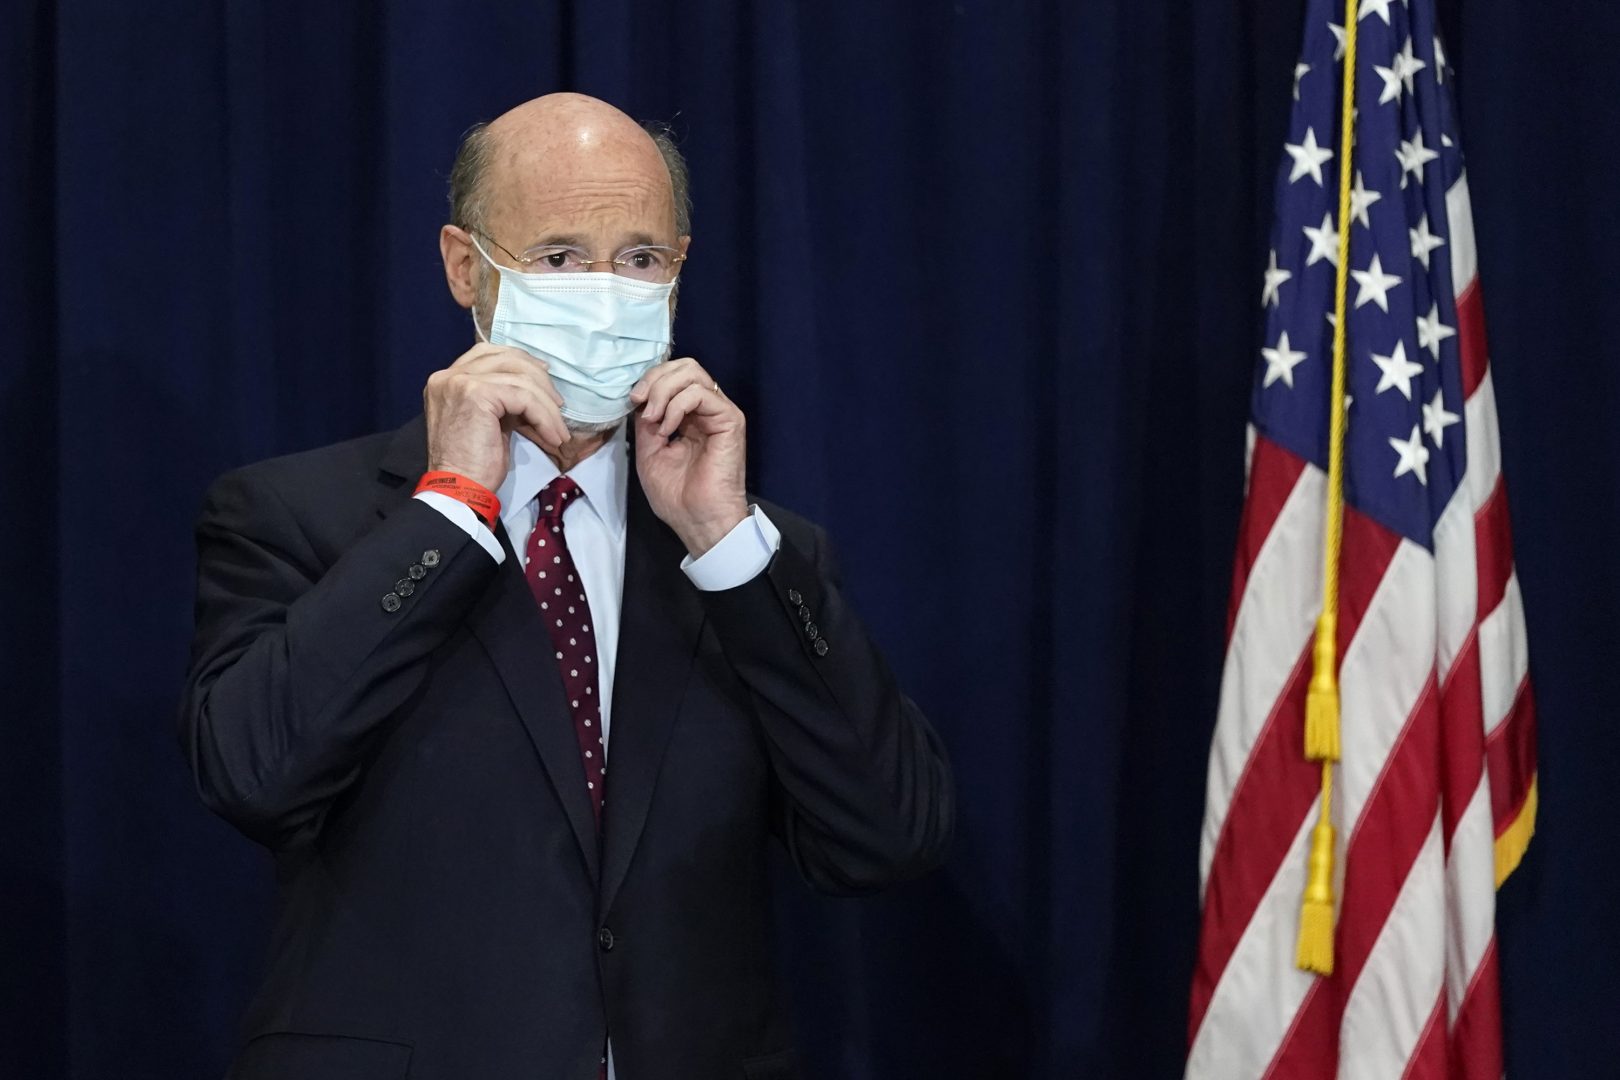 In this Nov. 4, 2020, file photo, Pennsylvania Gov. Tom Wolf adjusts his face mask to protect against COVID-19 during a news conference in Harrisburg, Pa. 